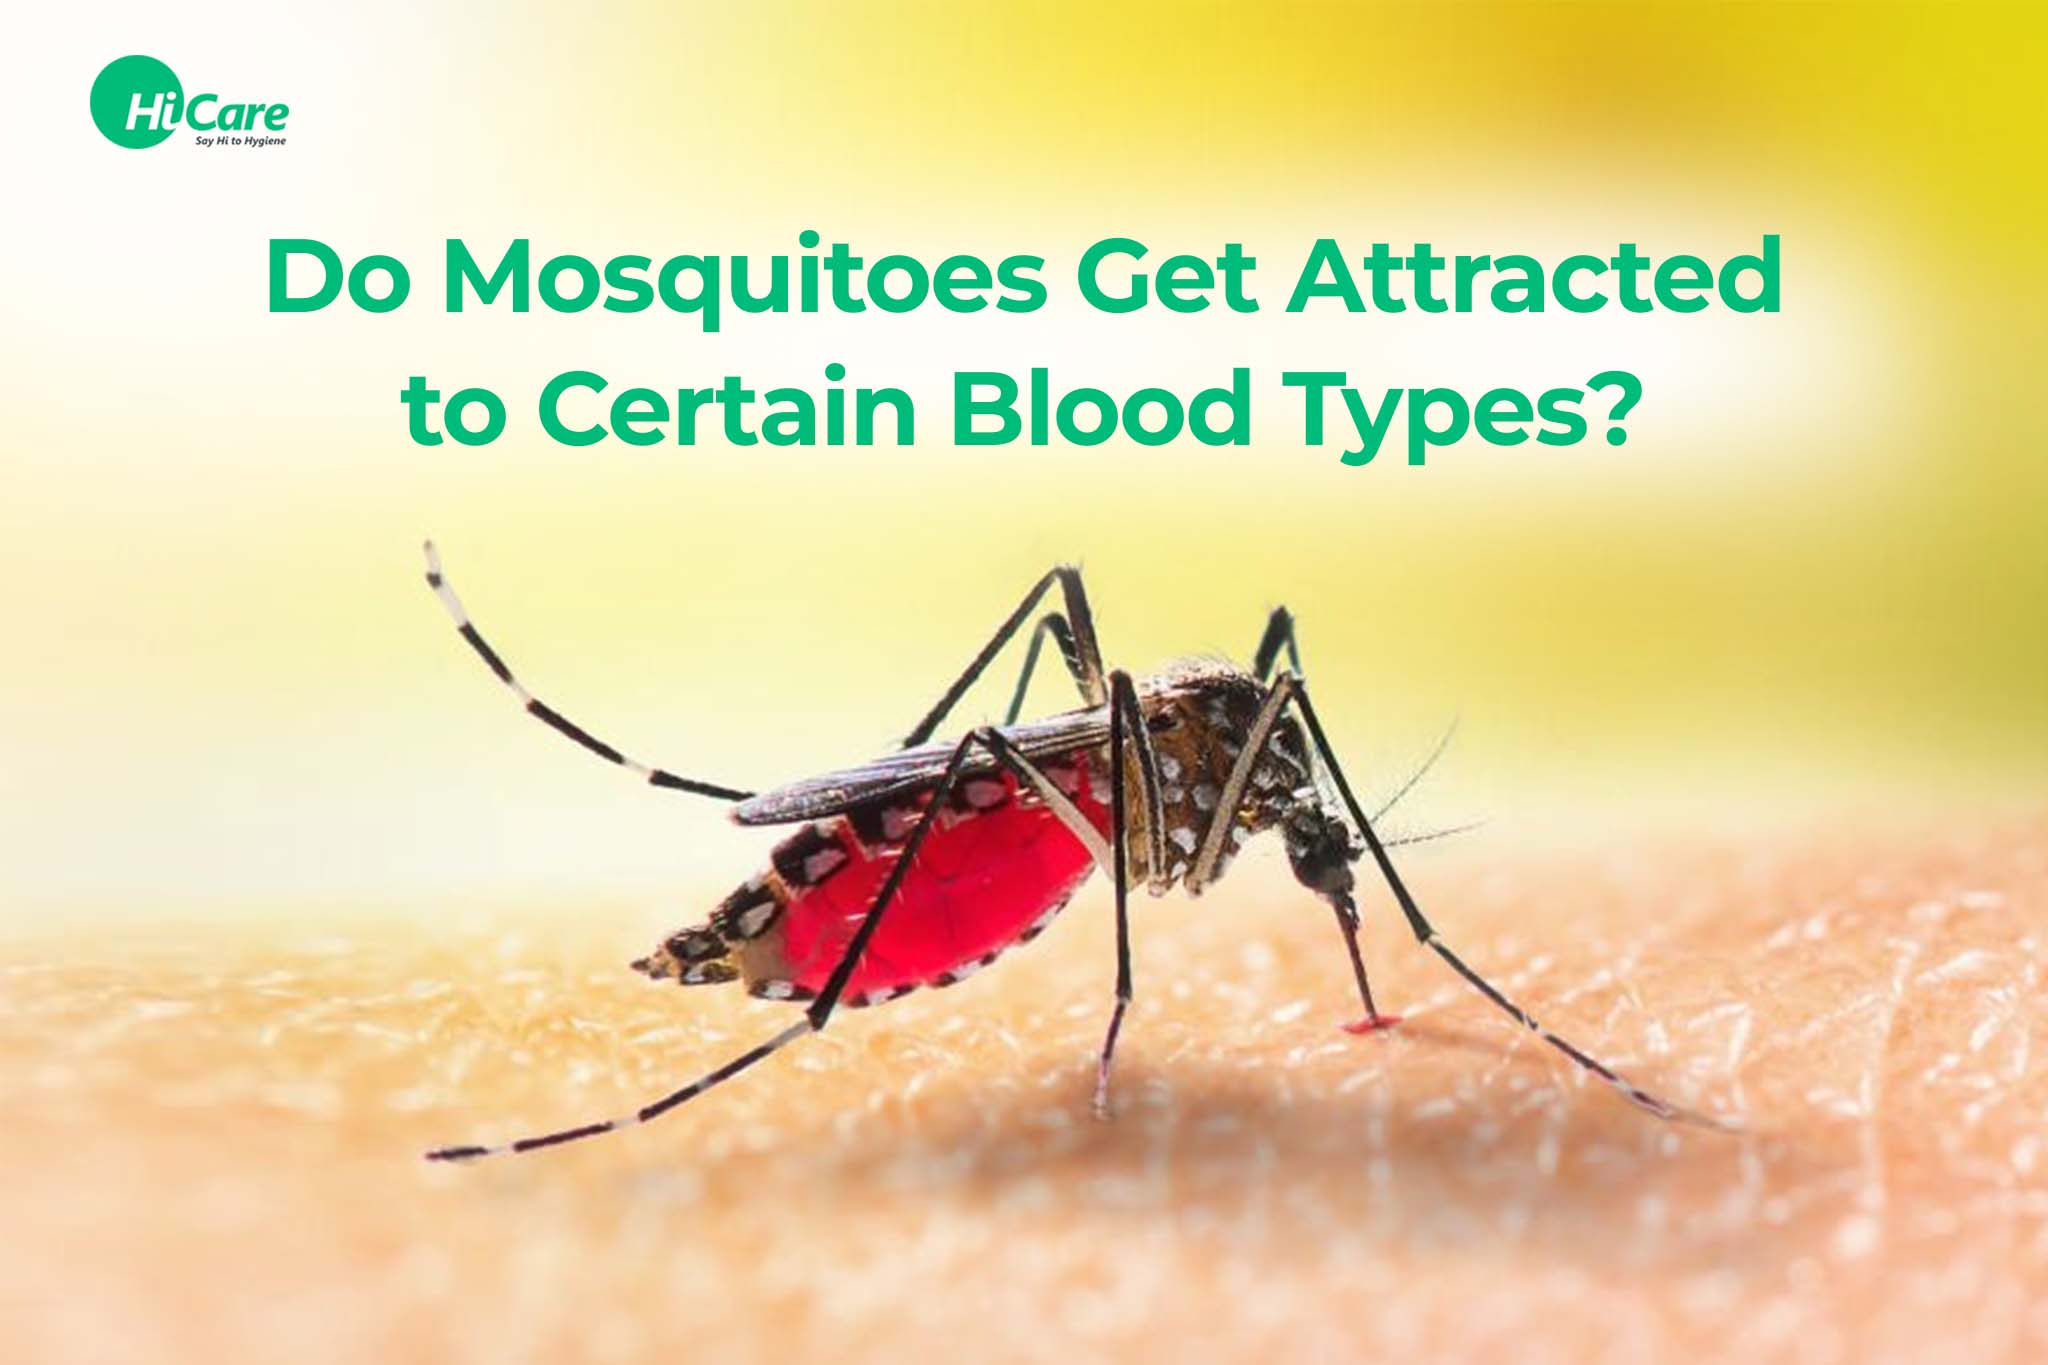 Do Mosquitoes Get Attracted to Certain Blood Types?